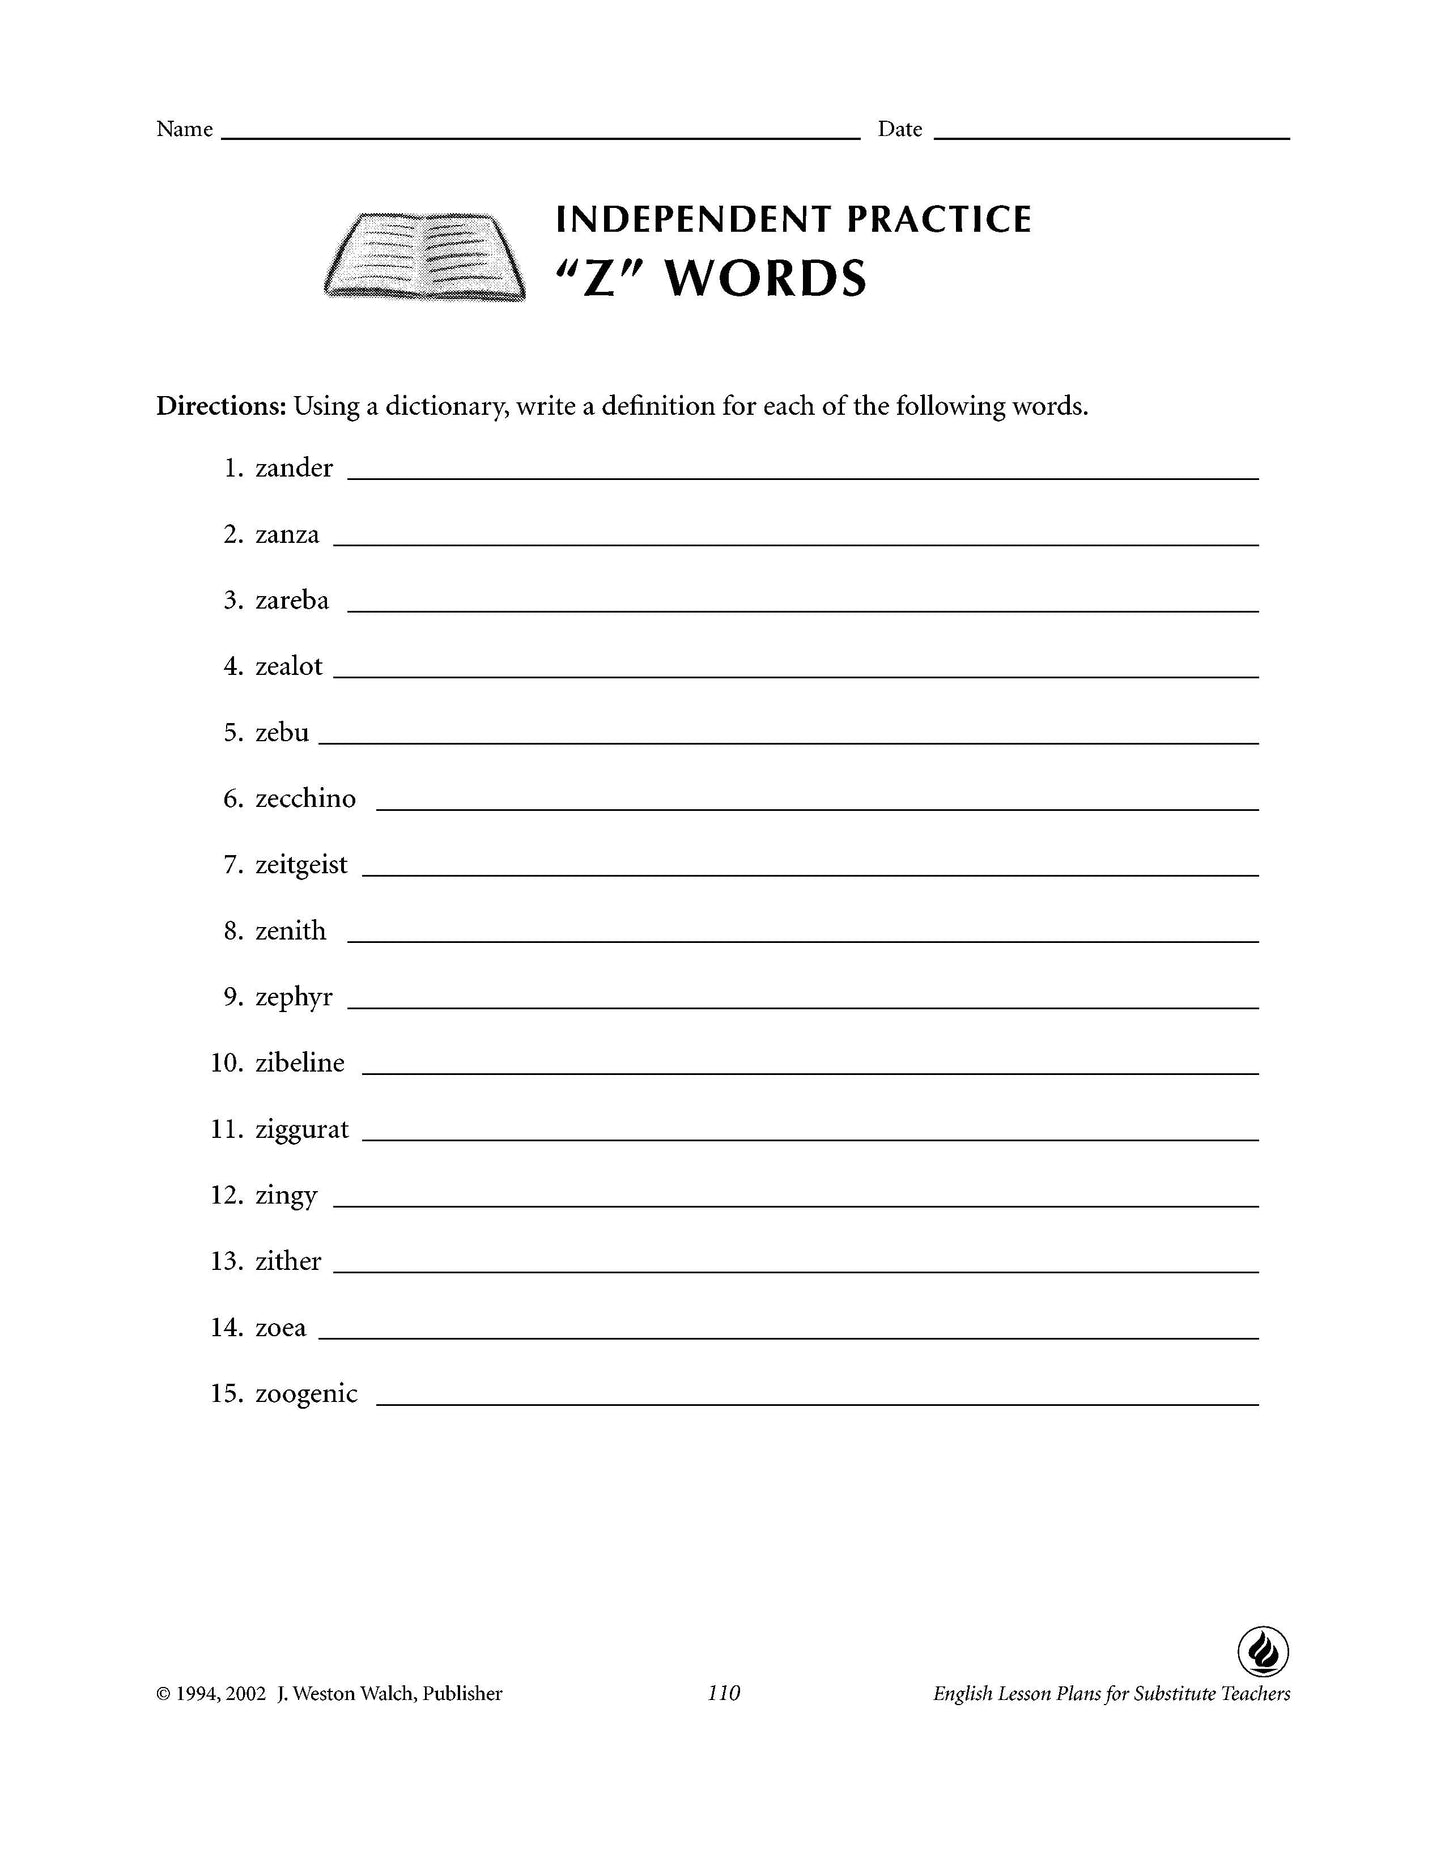 English Lesson Plans for Substitute Teachers, Bright Education Australia, Book, Grammar, English, School Materials, Games, Puzzles, Activities, Teaching Resource